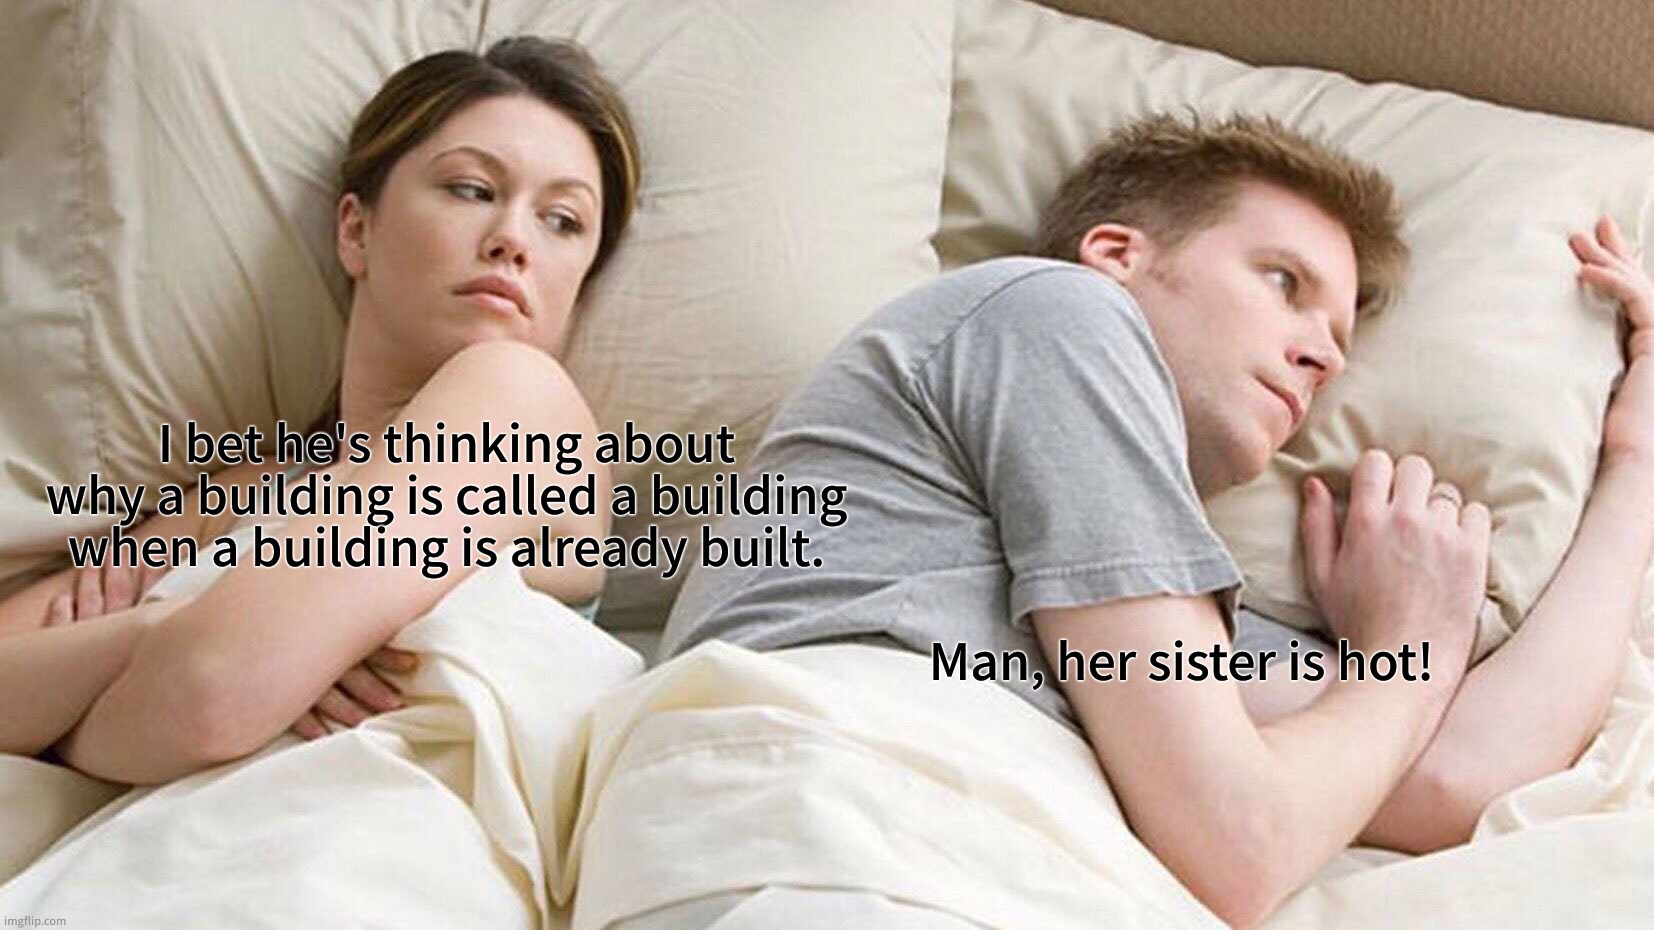 plot twist lol | I bet he's thinking about why a building is called a building when a building is already built. Man, her sister is hot! | image tagged in memes,i bet he's thinking about other women | made w/ Imgflip meme maker